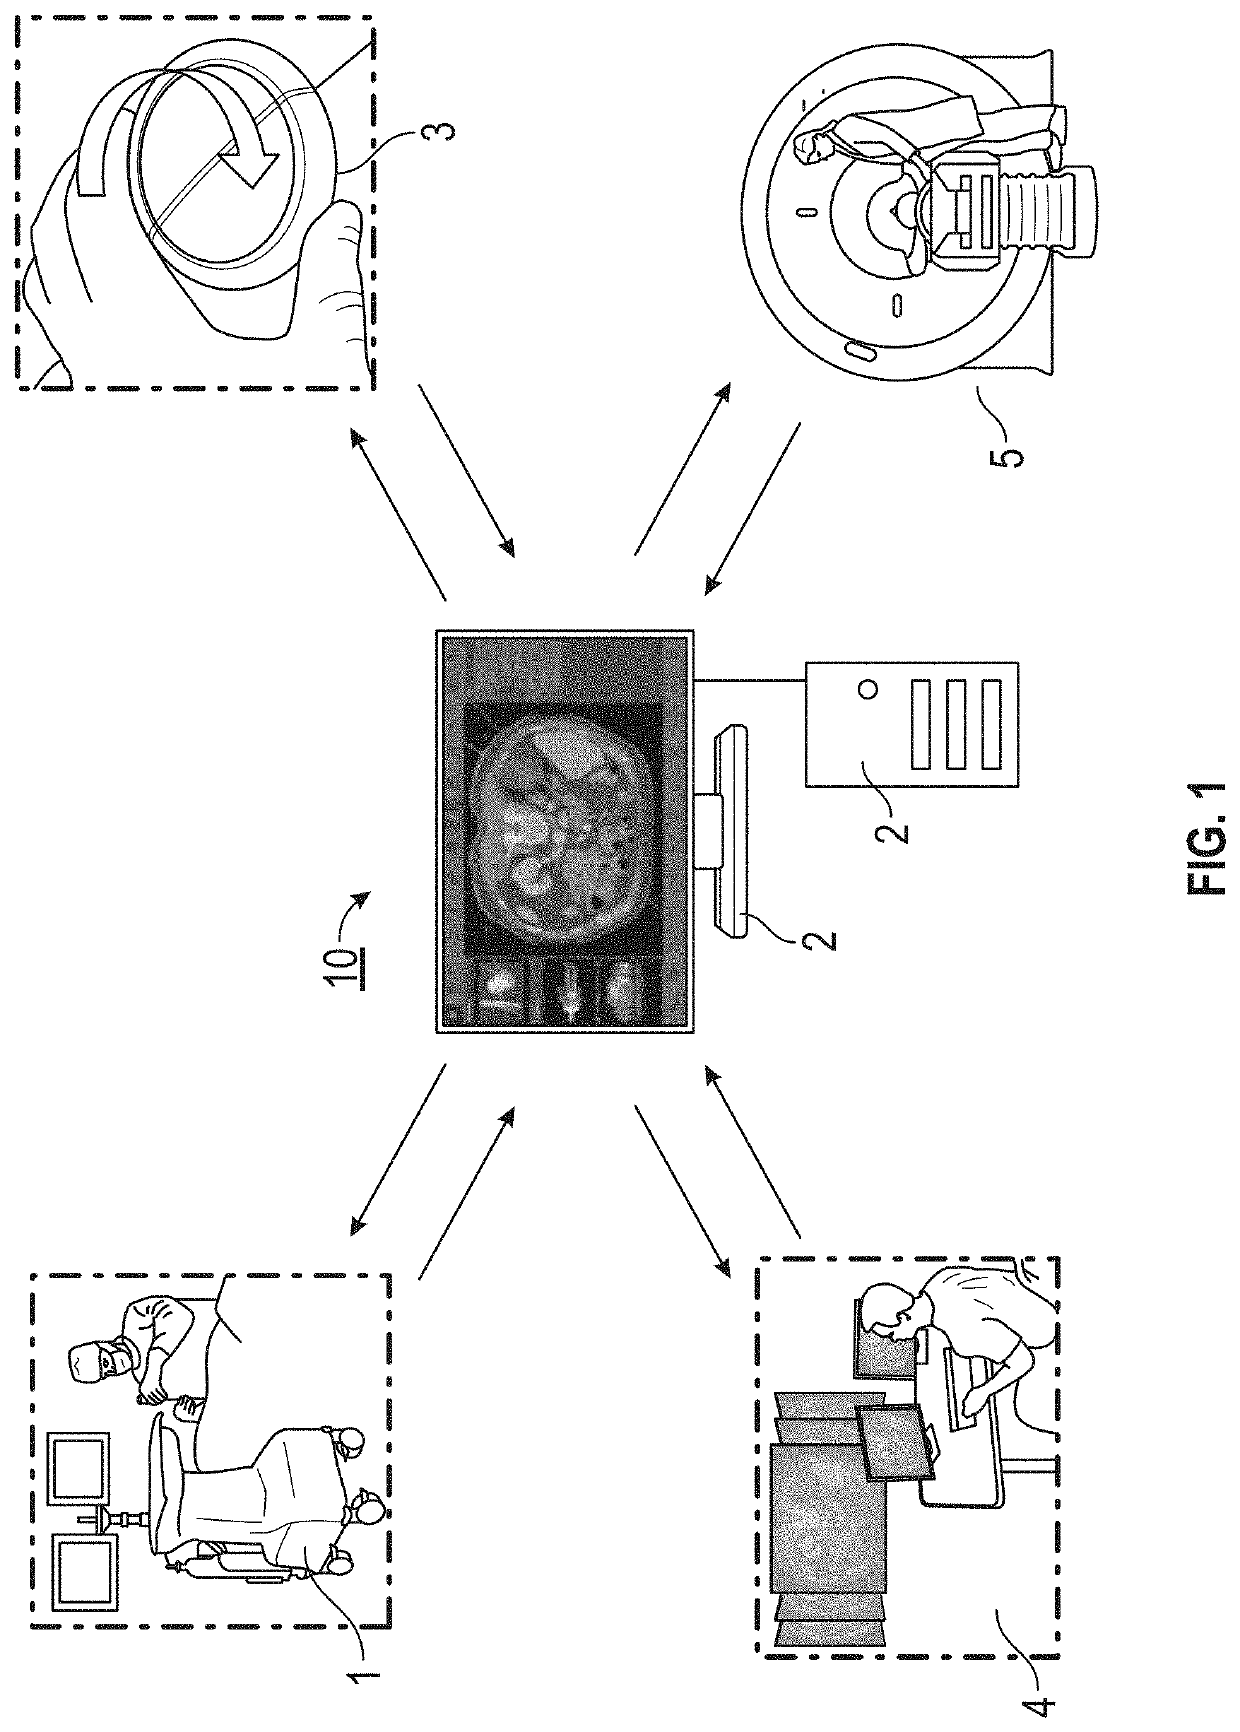 Devices, systems, and methods to emphasize regions of interest across multiple imaging modalities